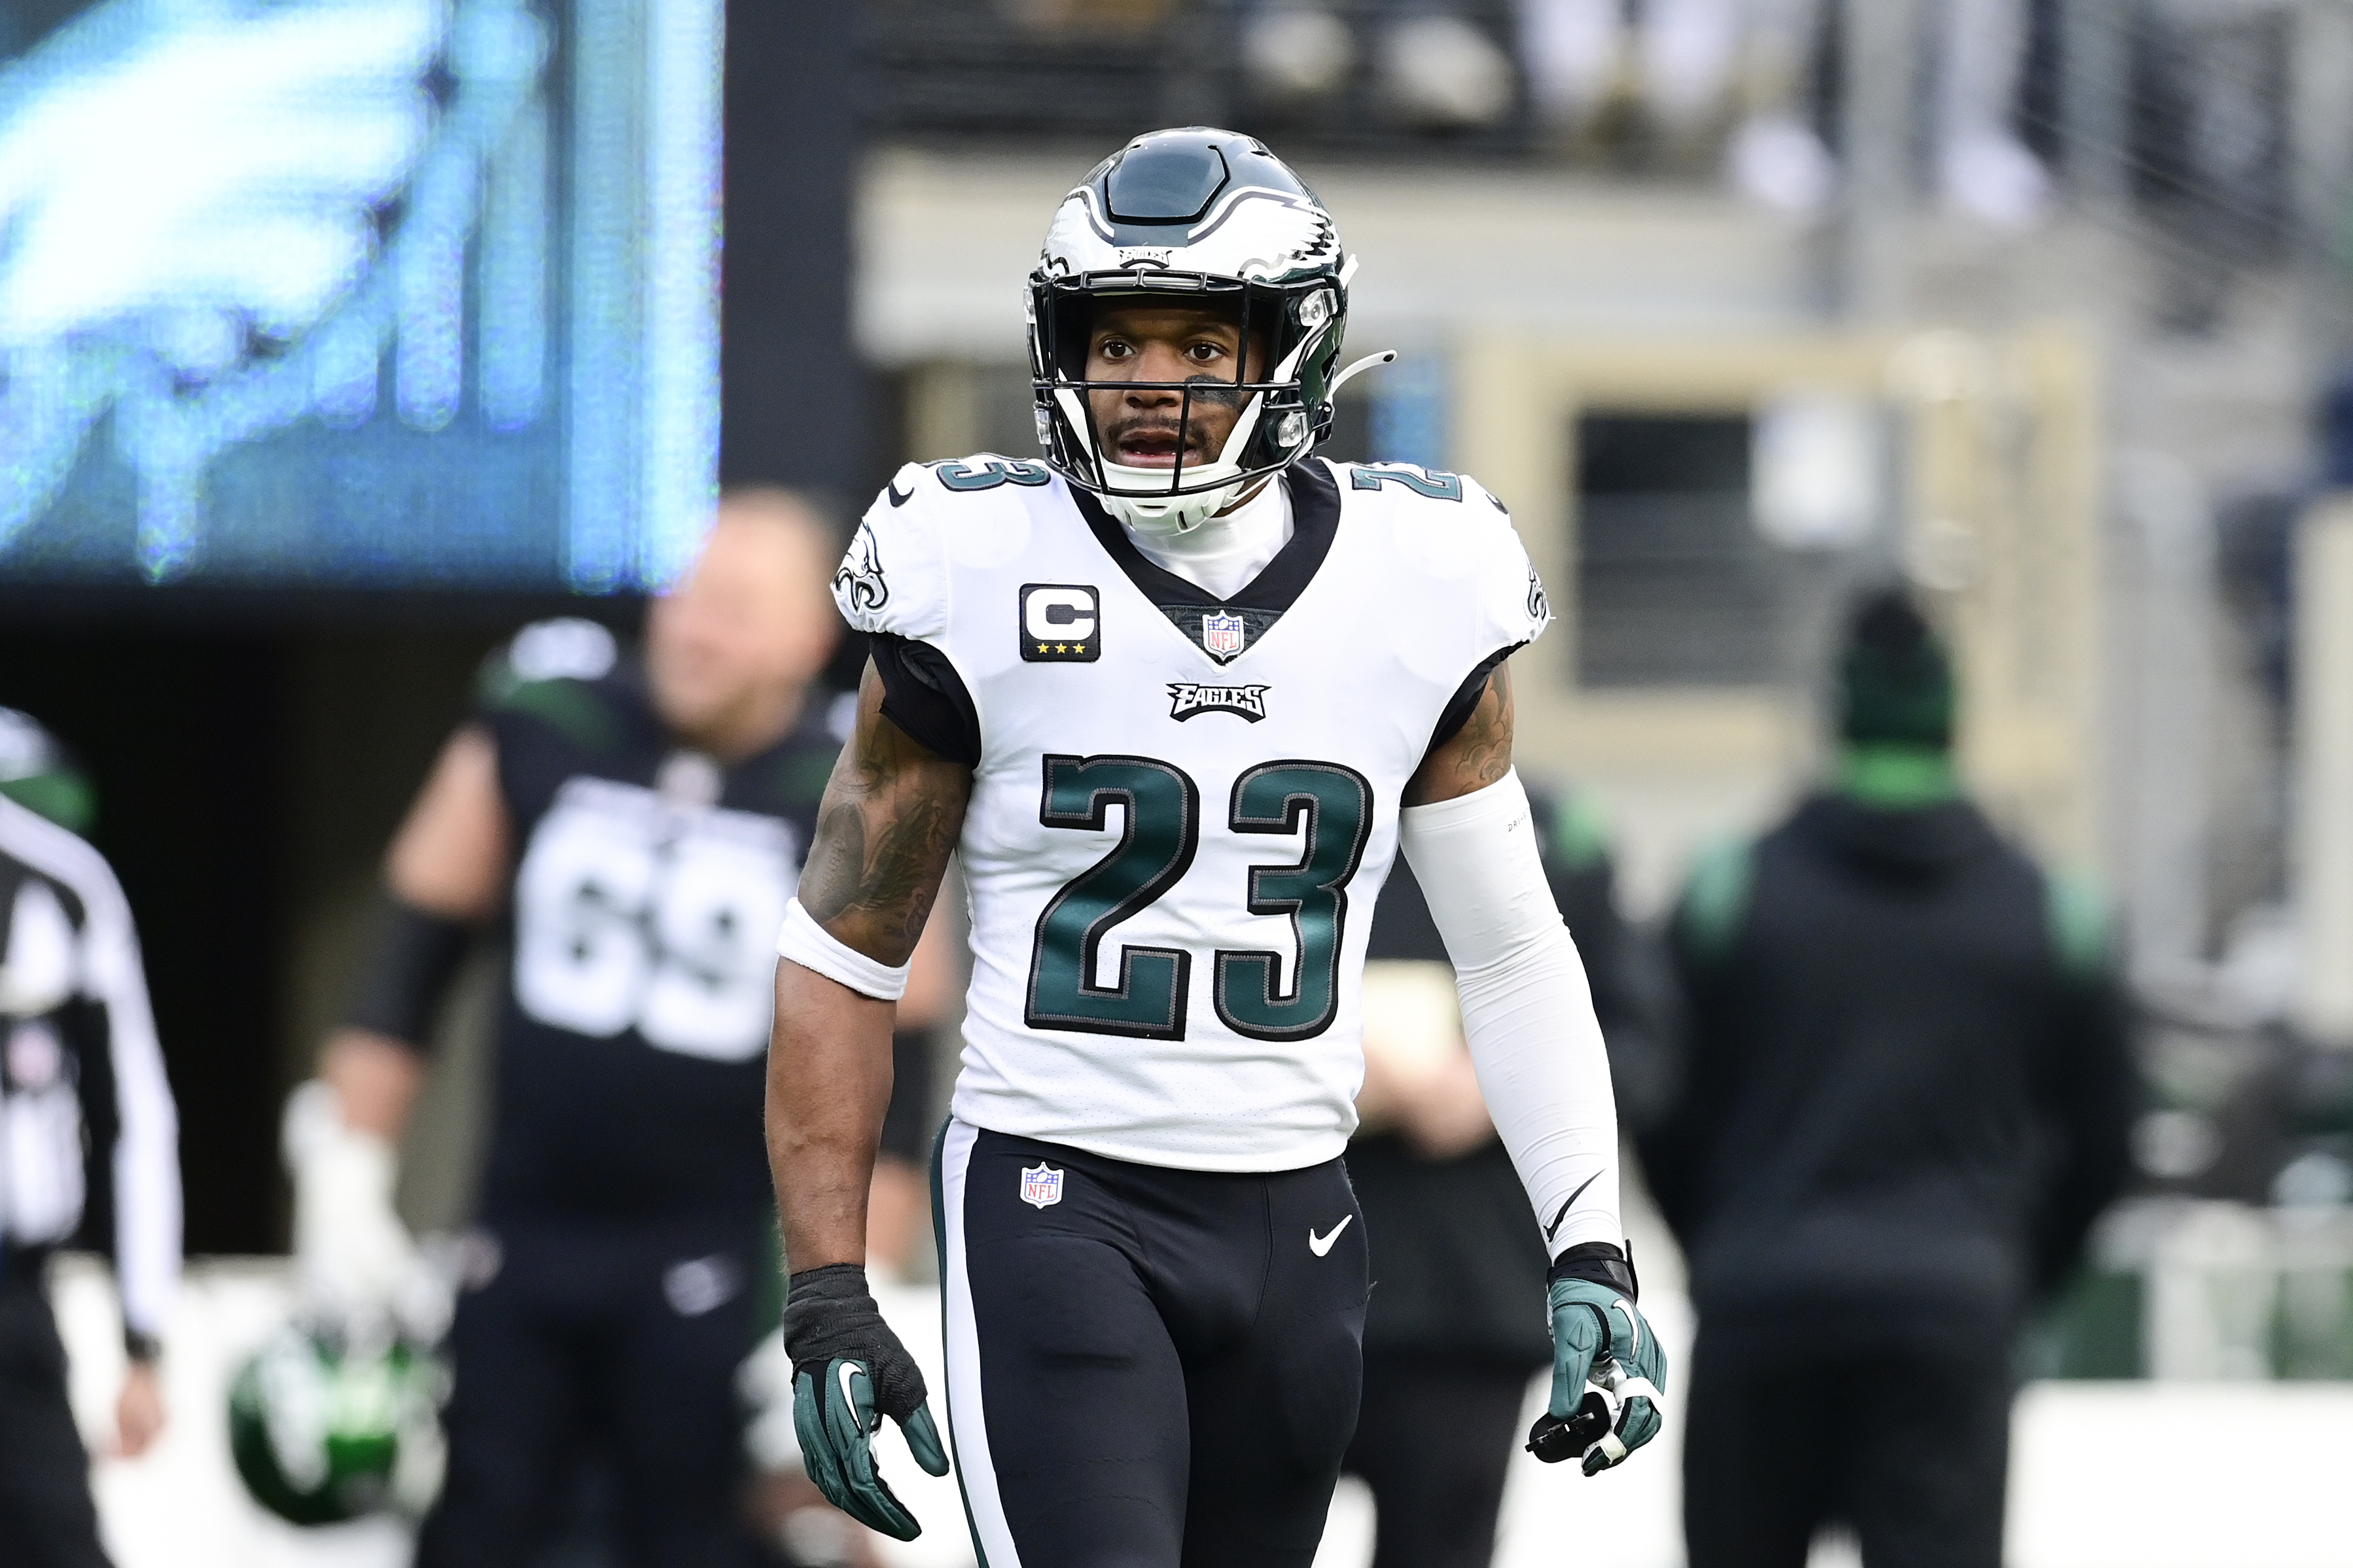 Colts: Finalizing deal with former Eagles S Rodney McLeod